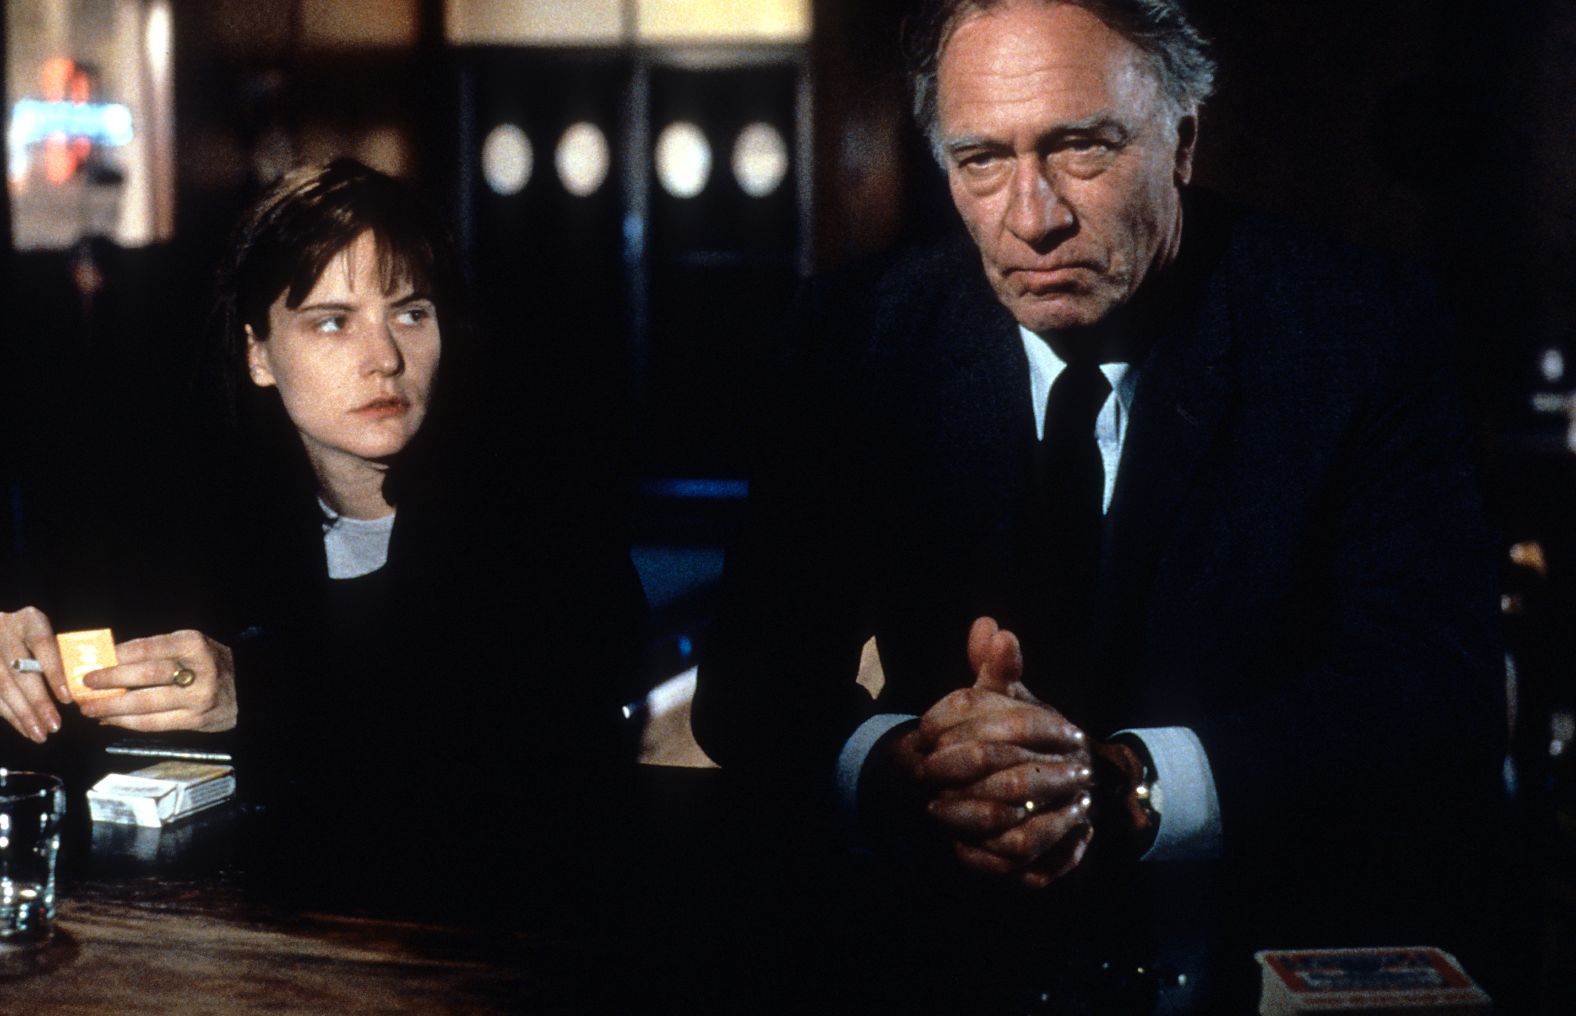 Plummer and Jennifer Jason Leigh appear in a scene from the 1995 film "Dolores Claiborne."